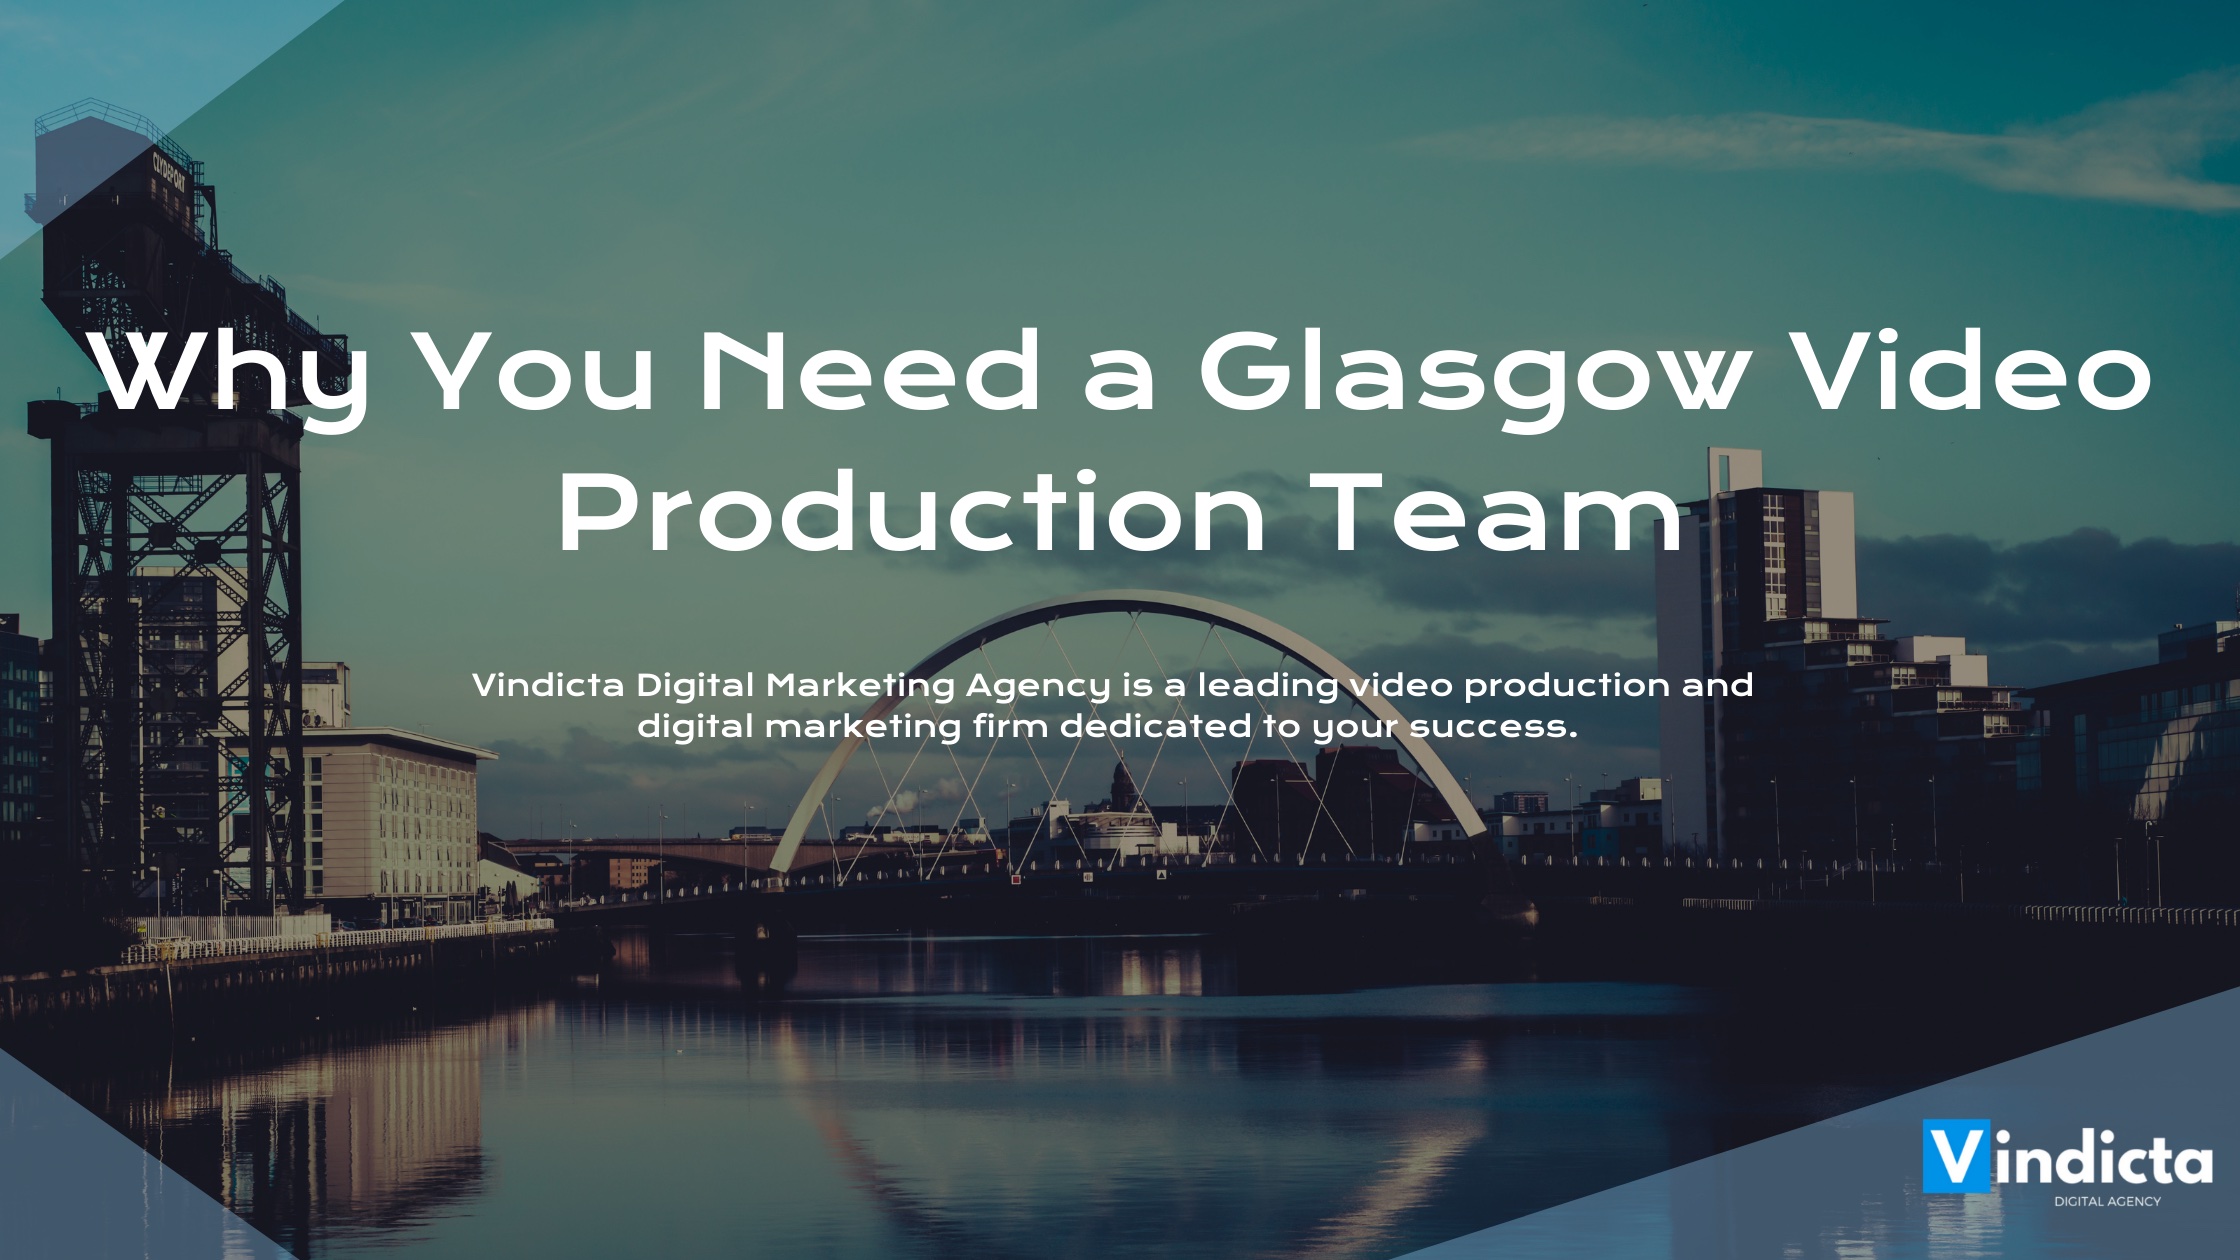 Glasgow-Video-Production-Agency